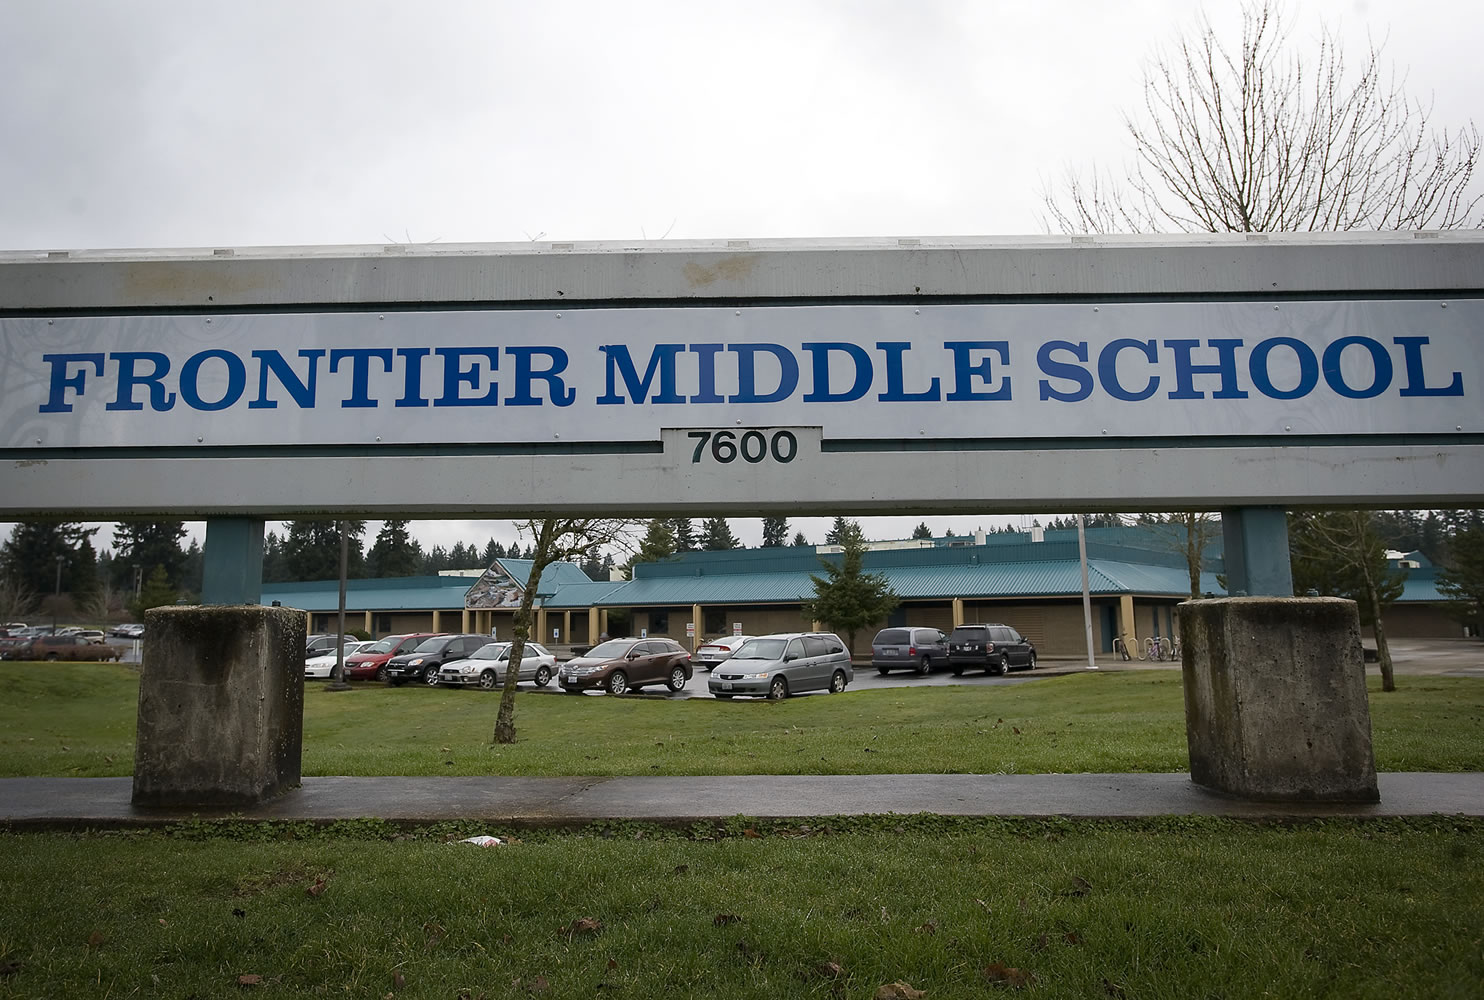 Frontier Middle School is at 7600 N.E. 166th Ave.